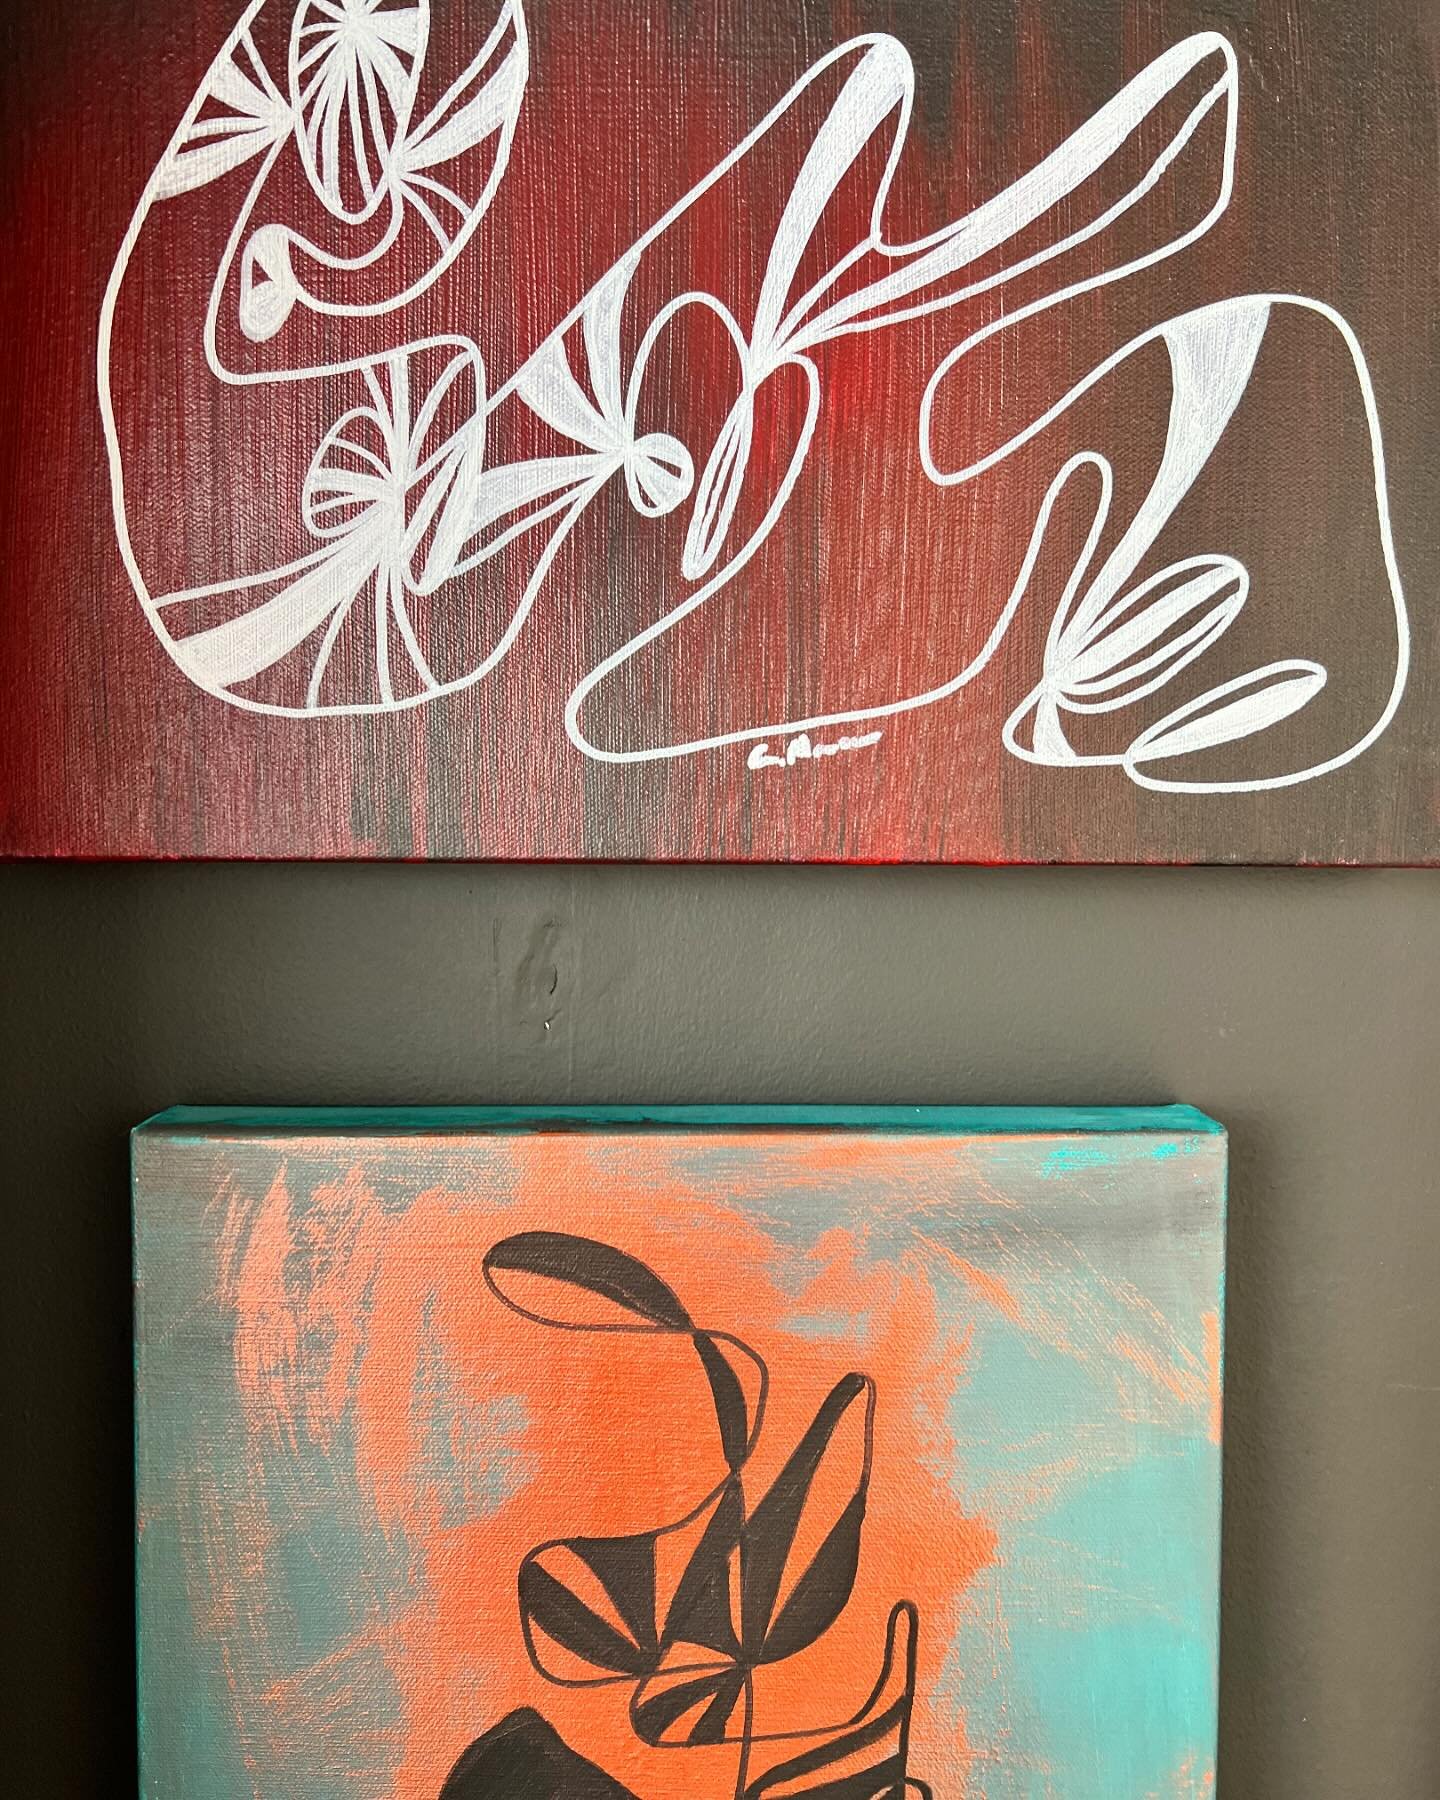 Some more street/abstract artwork coming your way.  These pieces aren&rsquo;t available online but if you&rsquo;re interested send me a message. 

.
.
.

#chavamancera #estudiochava #streetartwork #abstractartwork #abstractpaintings #originalpainting